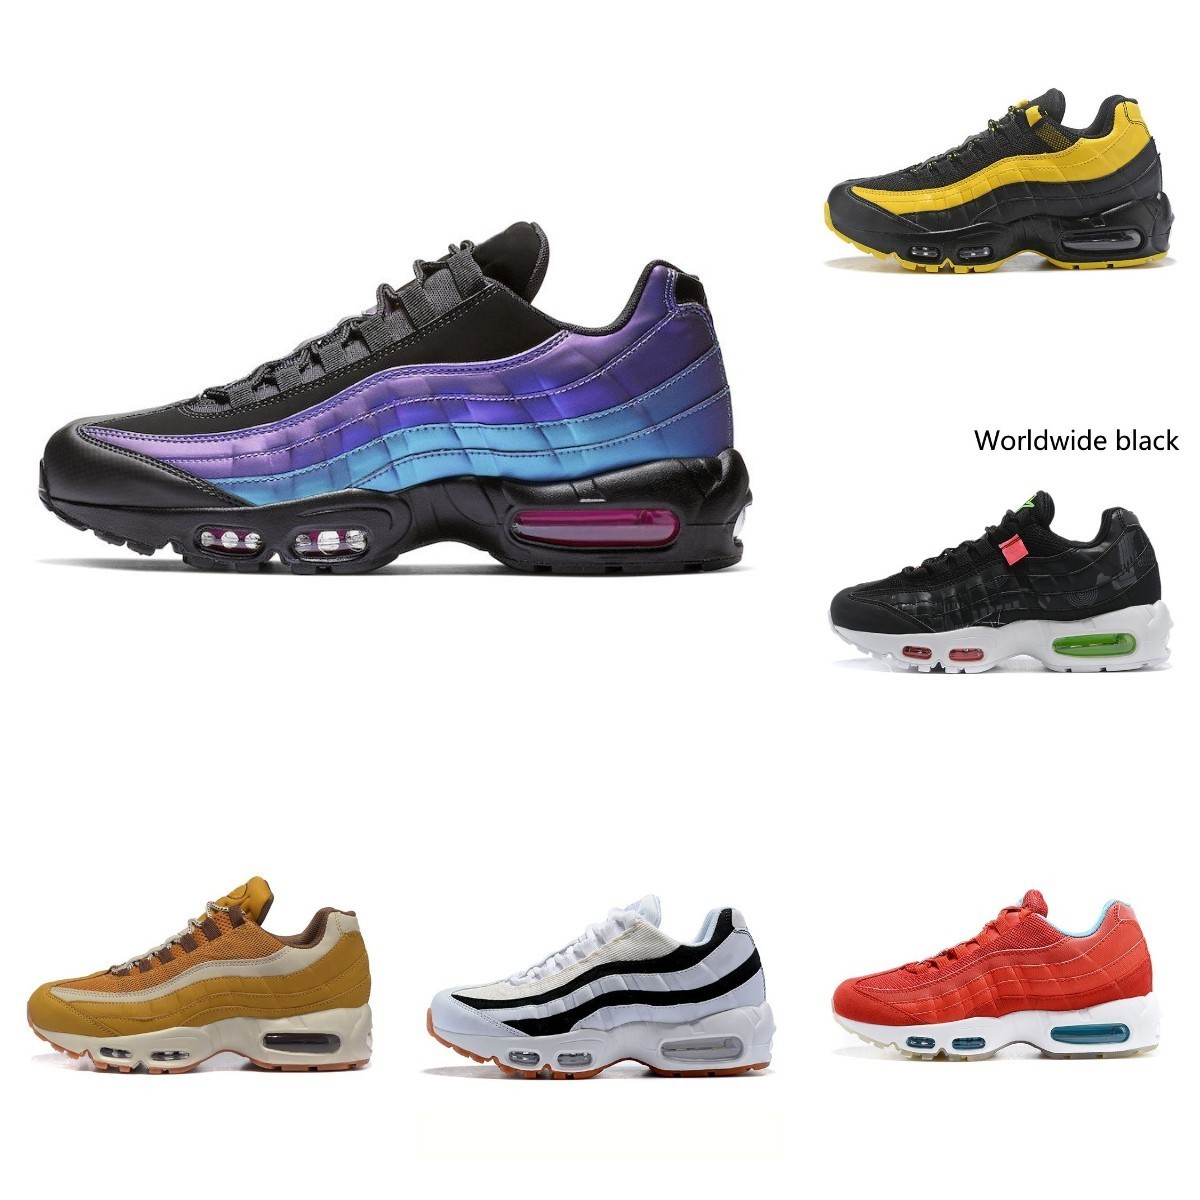 

Top Quality Mens Running Shoes Yin Yang OG Airs Solar Triple Black White 95 Worldwide Seahawks Particle Grey Neon Laser Fuchsia Red Greedy 3.0 Sports Sneakers Y961, Please contact us